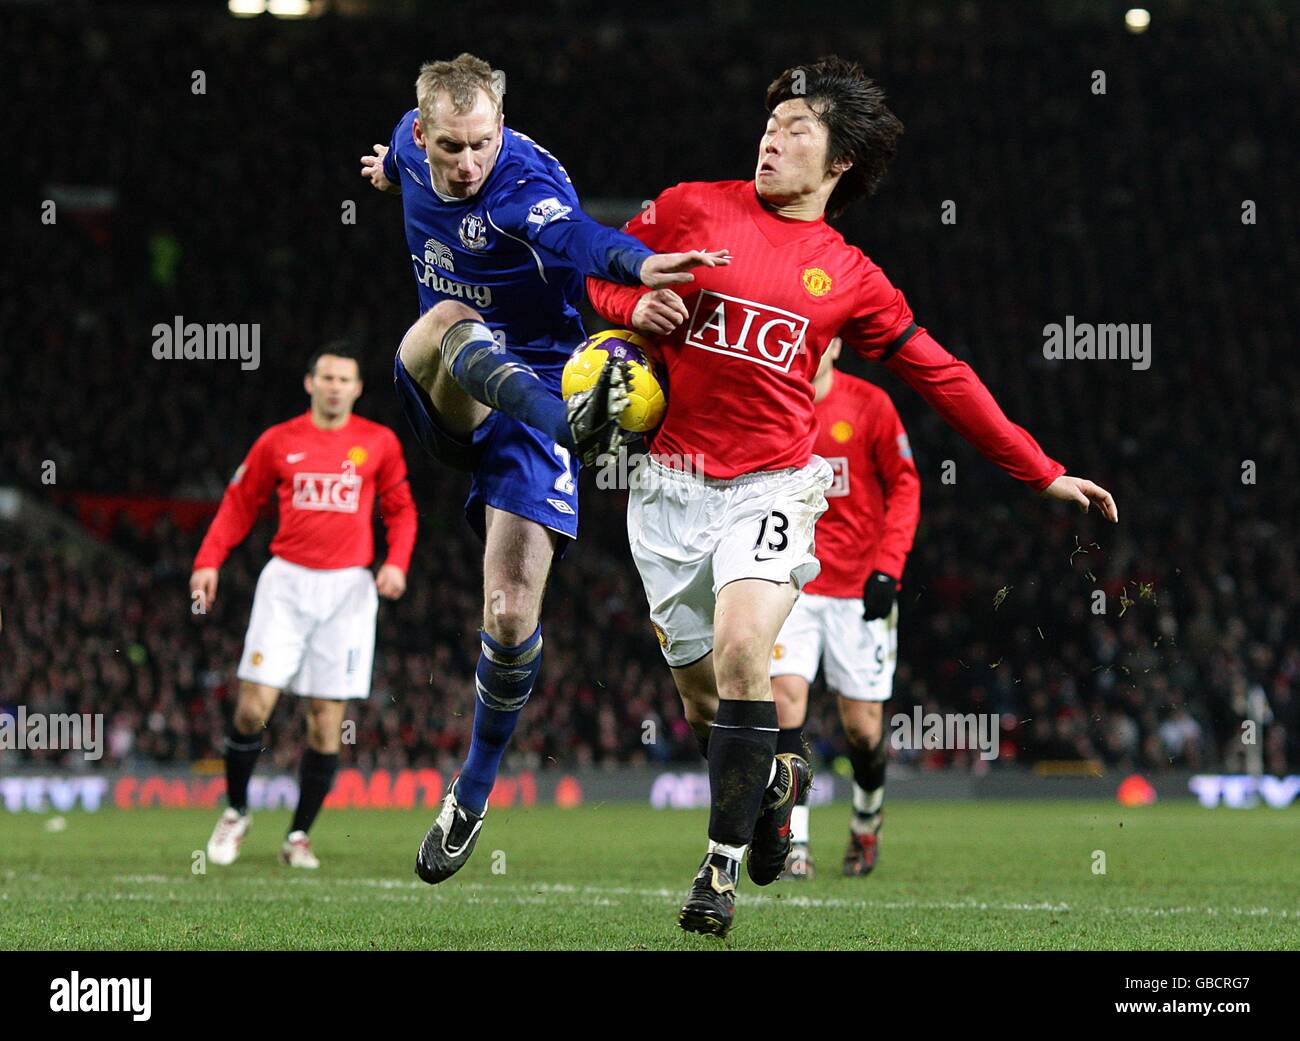 Soccer - Barclays Premier League - Manchester United v Everton - Old Trafford. Manchester United's Ji-Sung Park (r) and Everton's Tony Hibbert battle for the ball Stock Photo